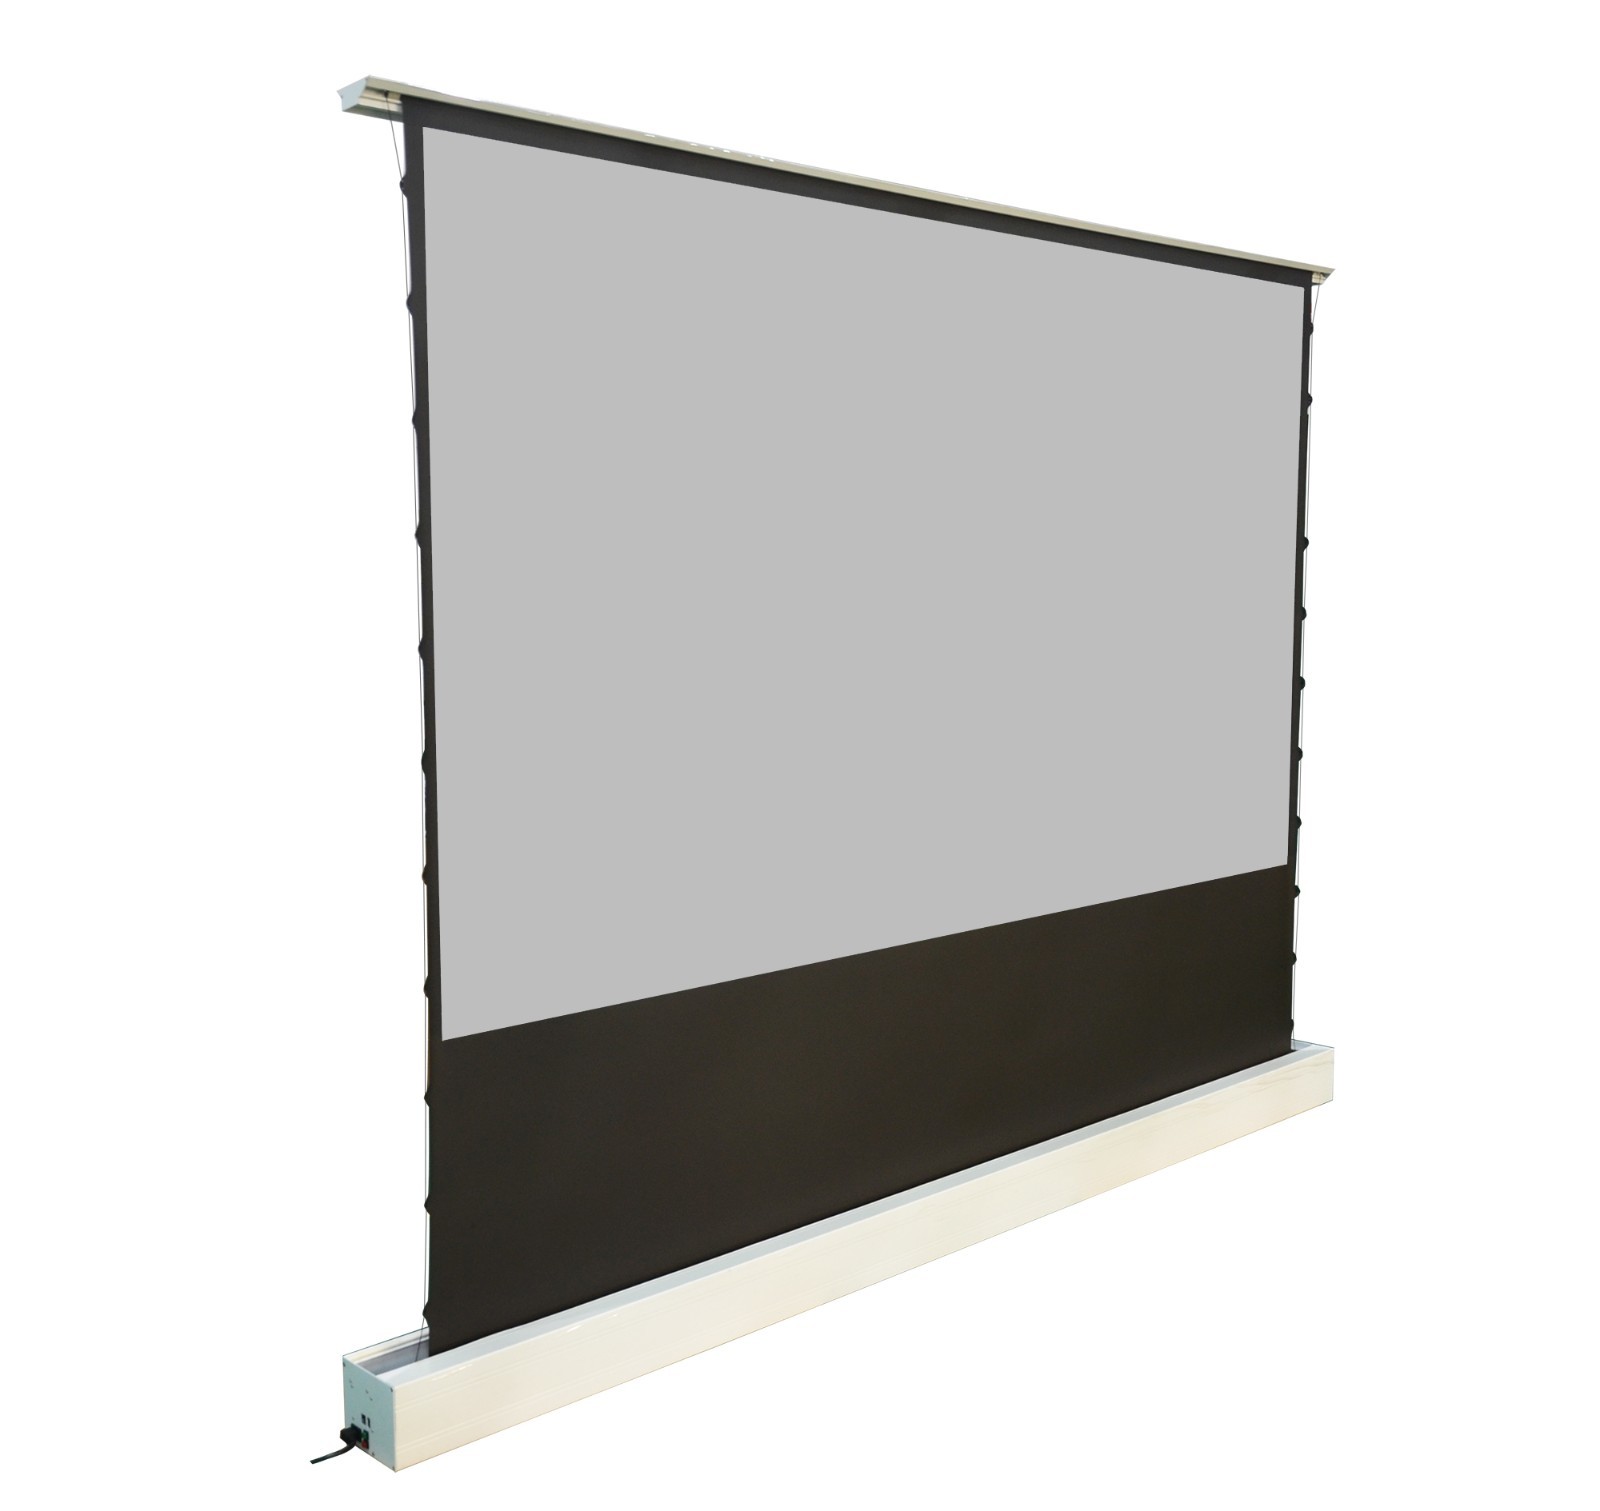 XY Screens manual pull up projector screen design for home